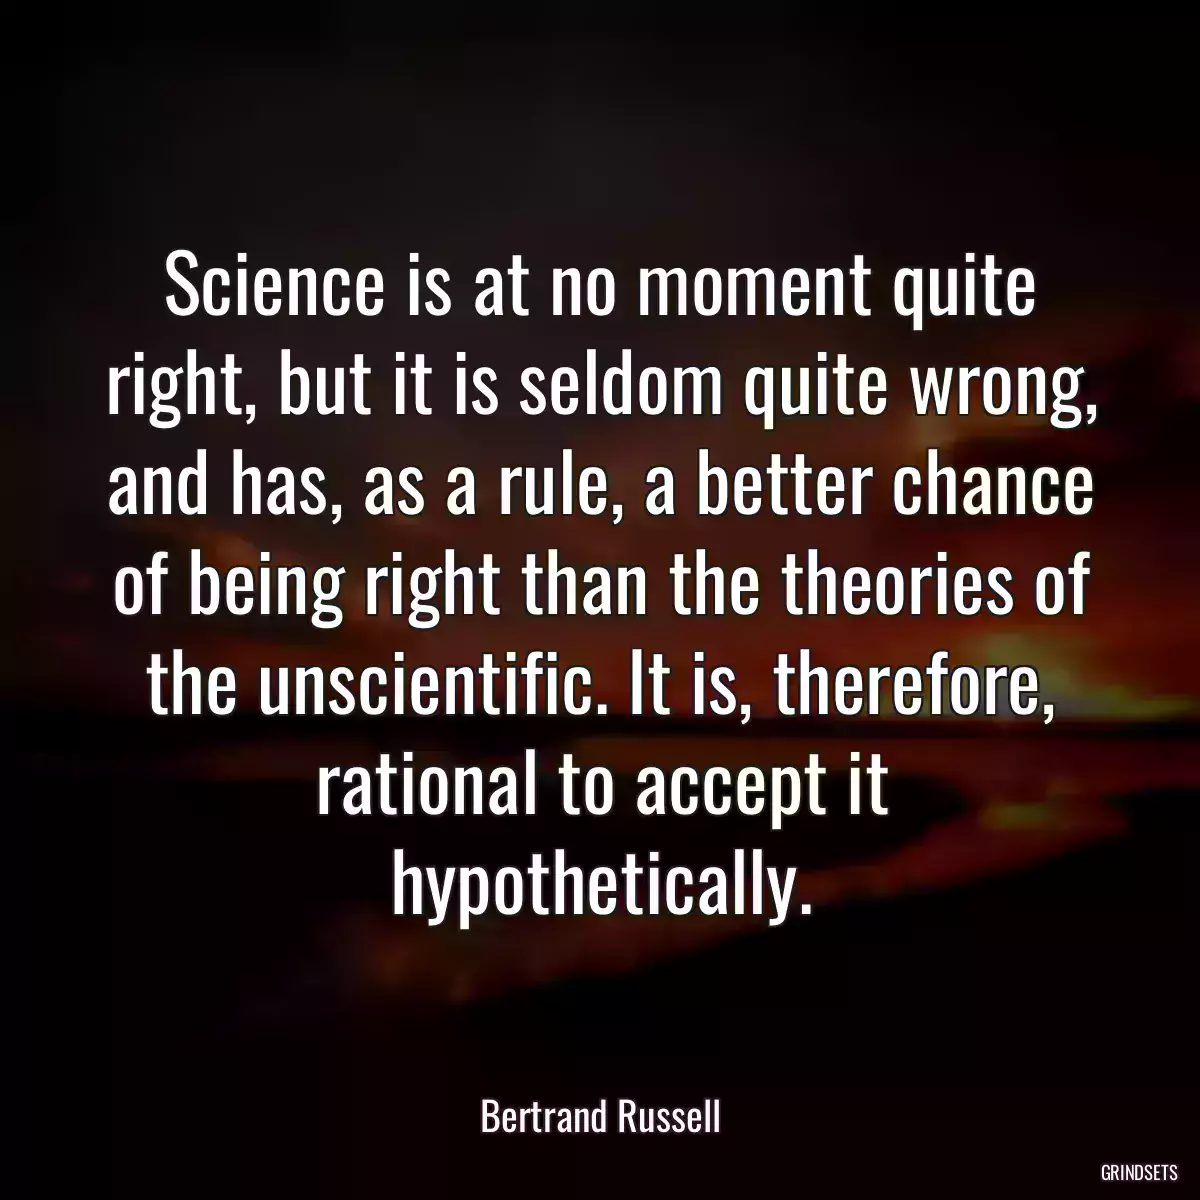 Science is at no moment quite right, but it is seldom quite wrong, and has, as a rule, a better chance of being right than the theories of the unscientific. It is, therefore, rational to accept it hypothetically.